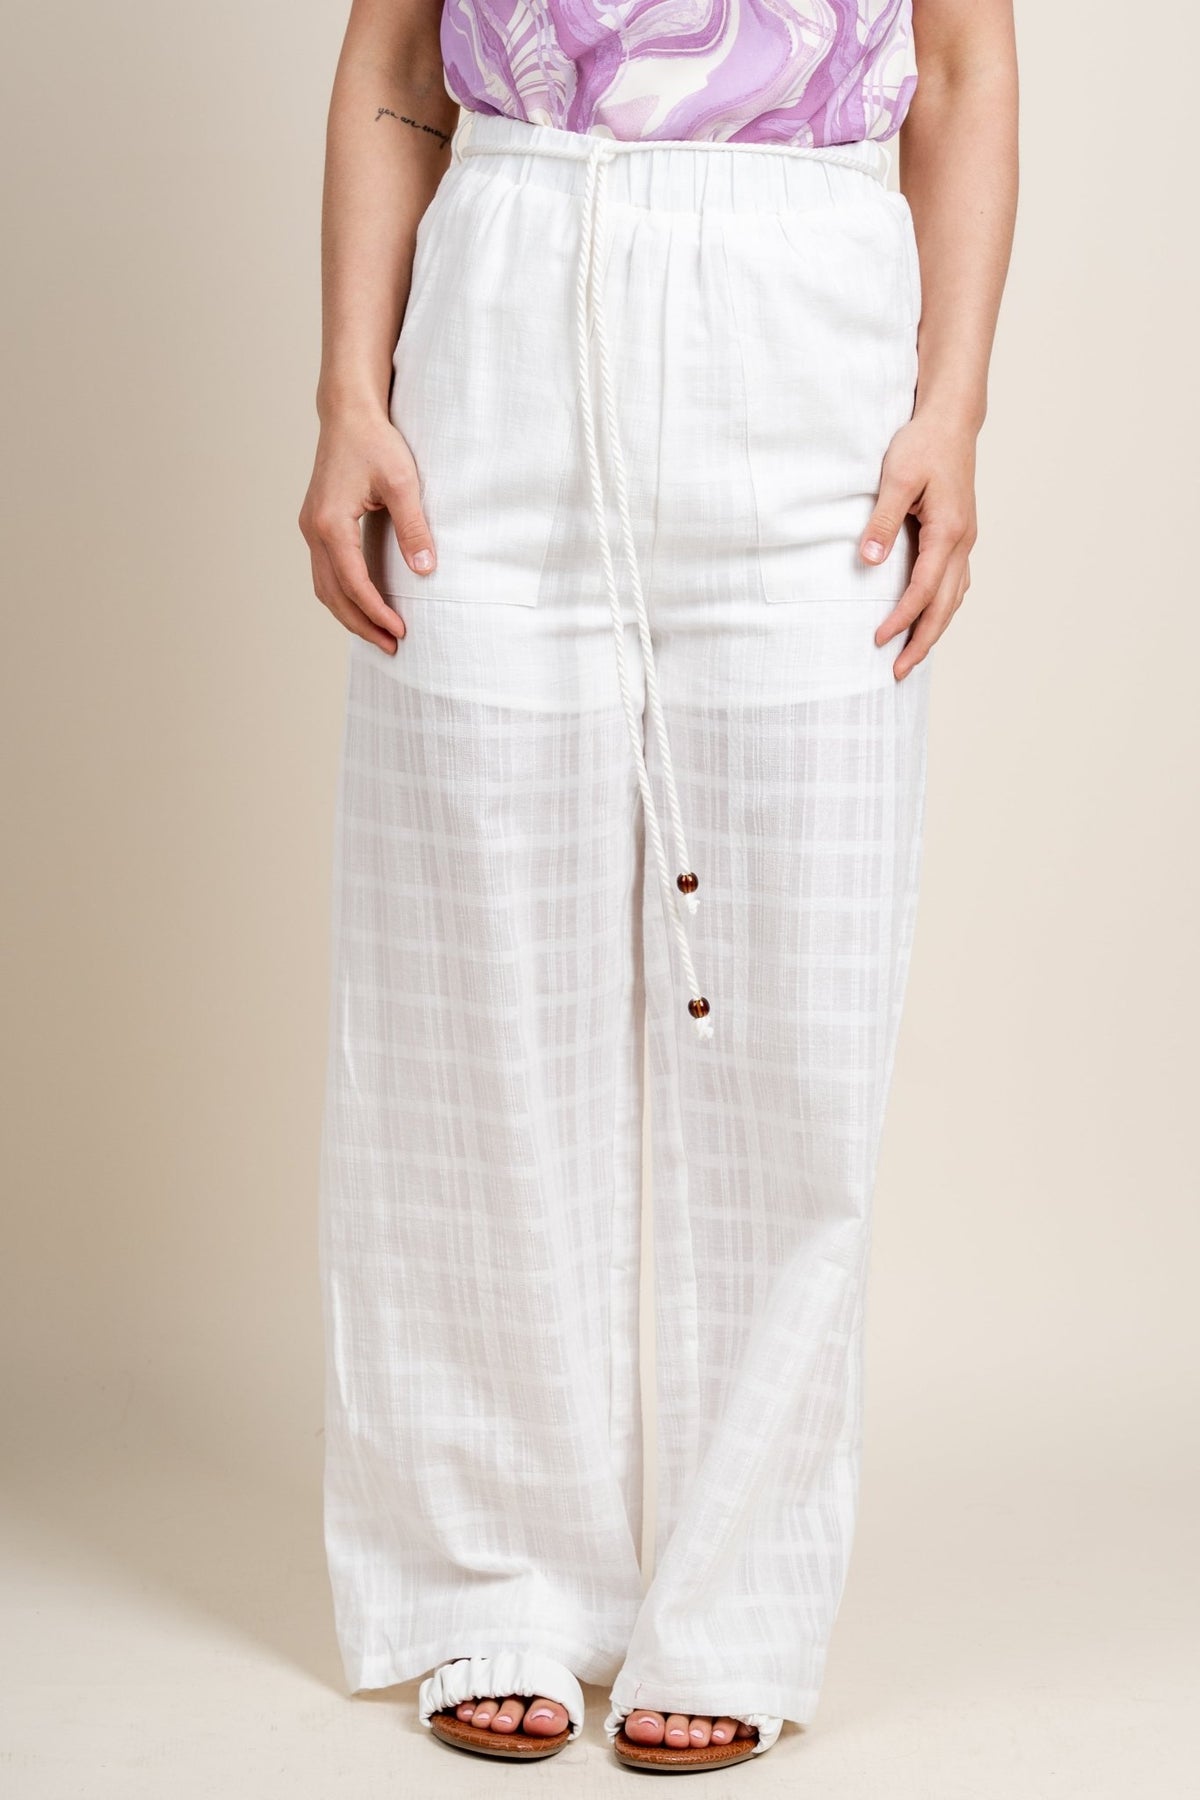 Linen tie waist pants off white - Trendy Pants - Cute Vacation Collection at Lush Fashion Lounge Boutique in Oklahoma City